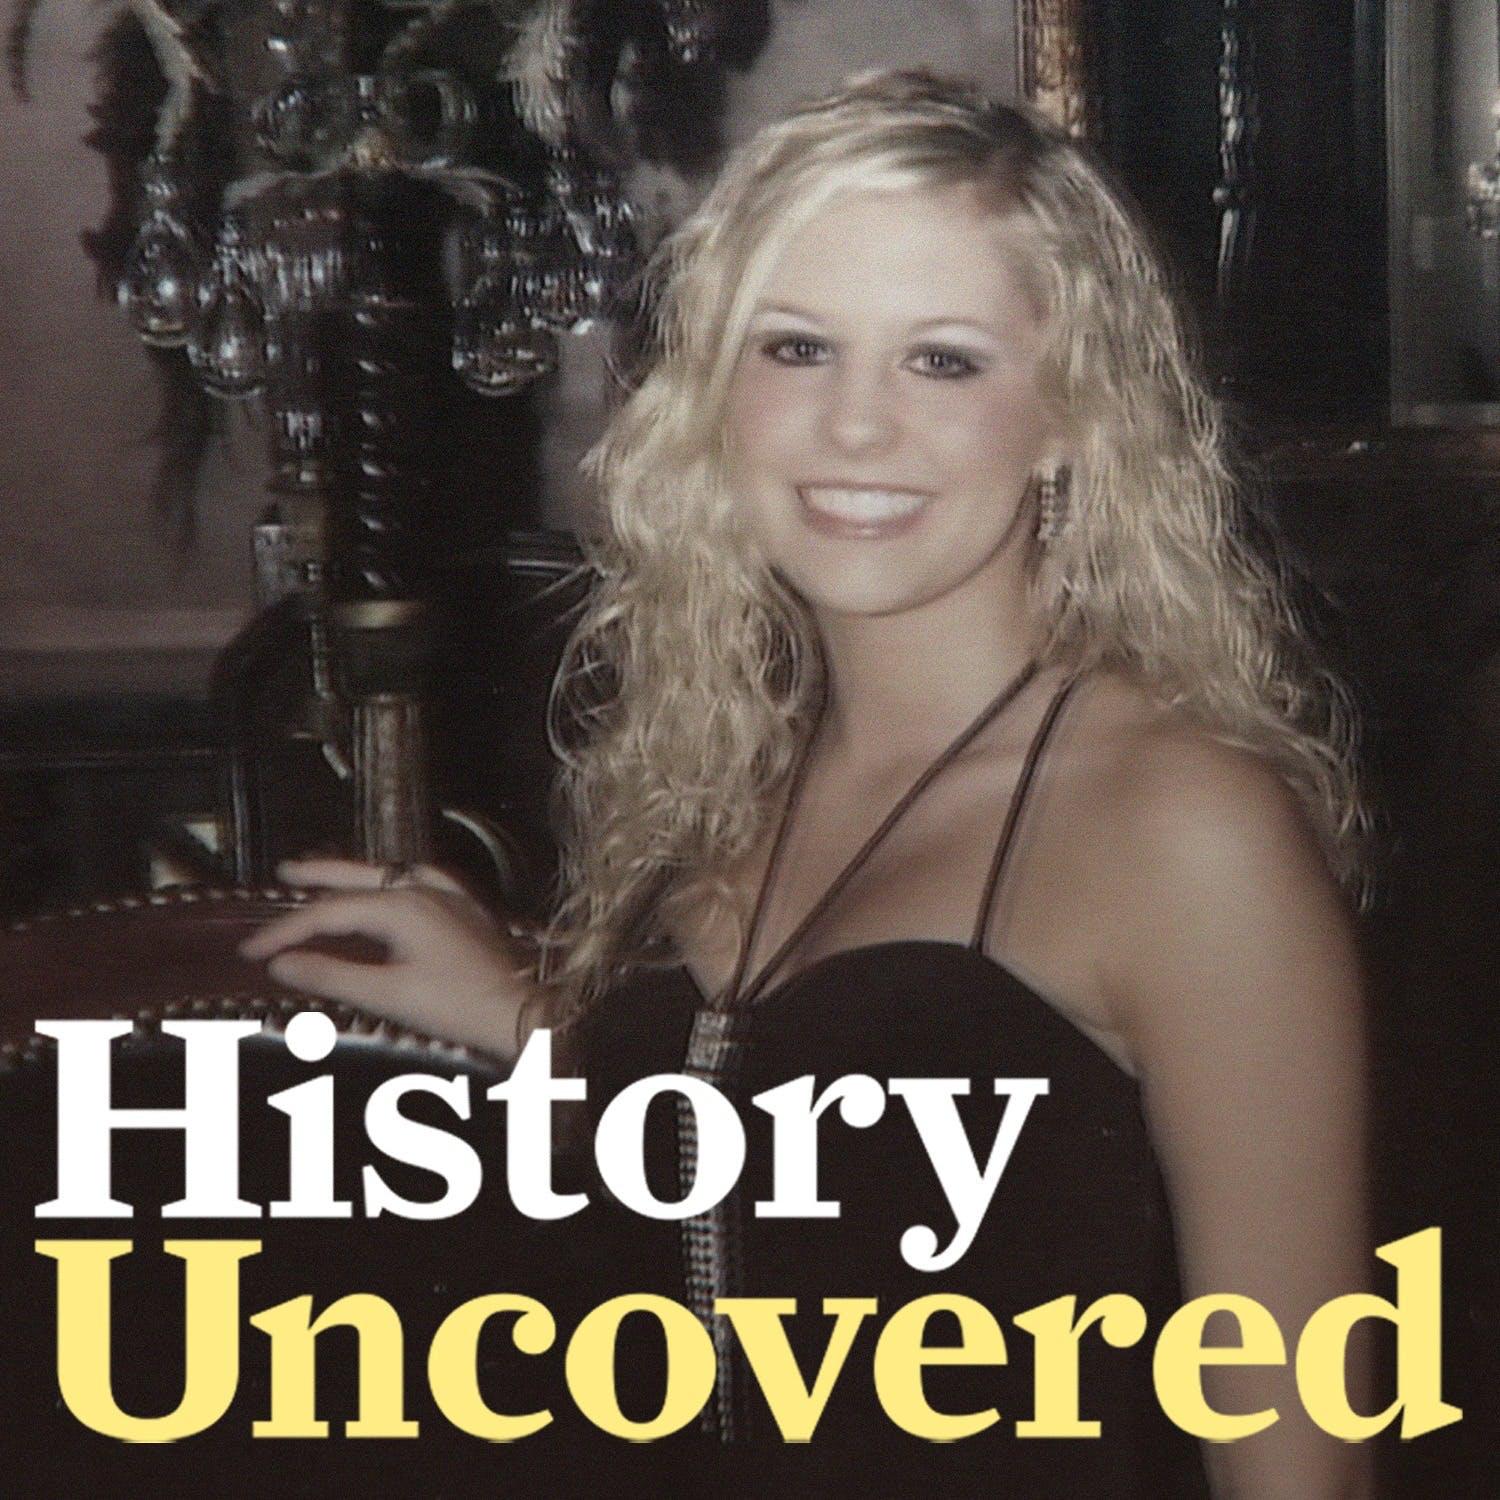 The Mysterious Disappearance Of Holly Bobo